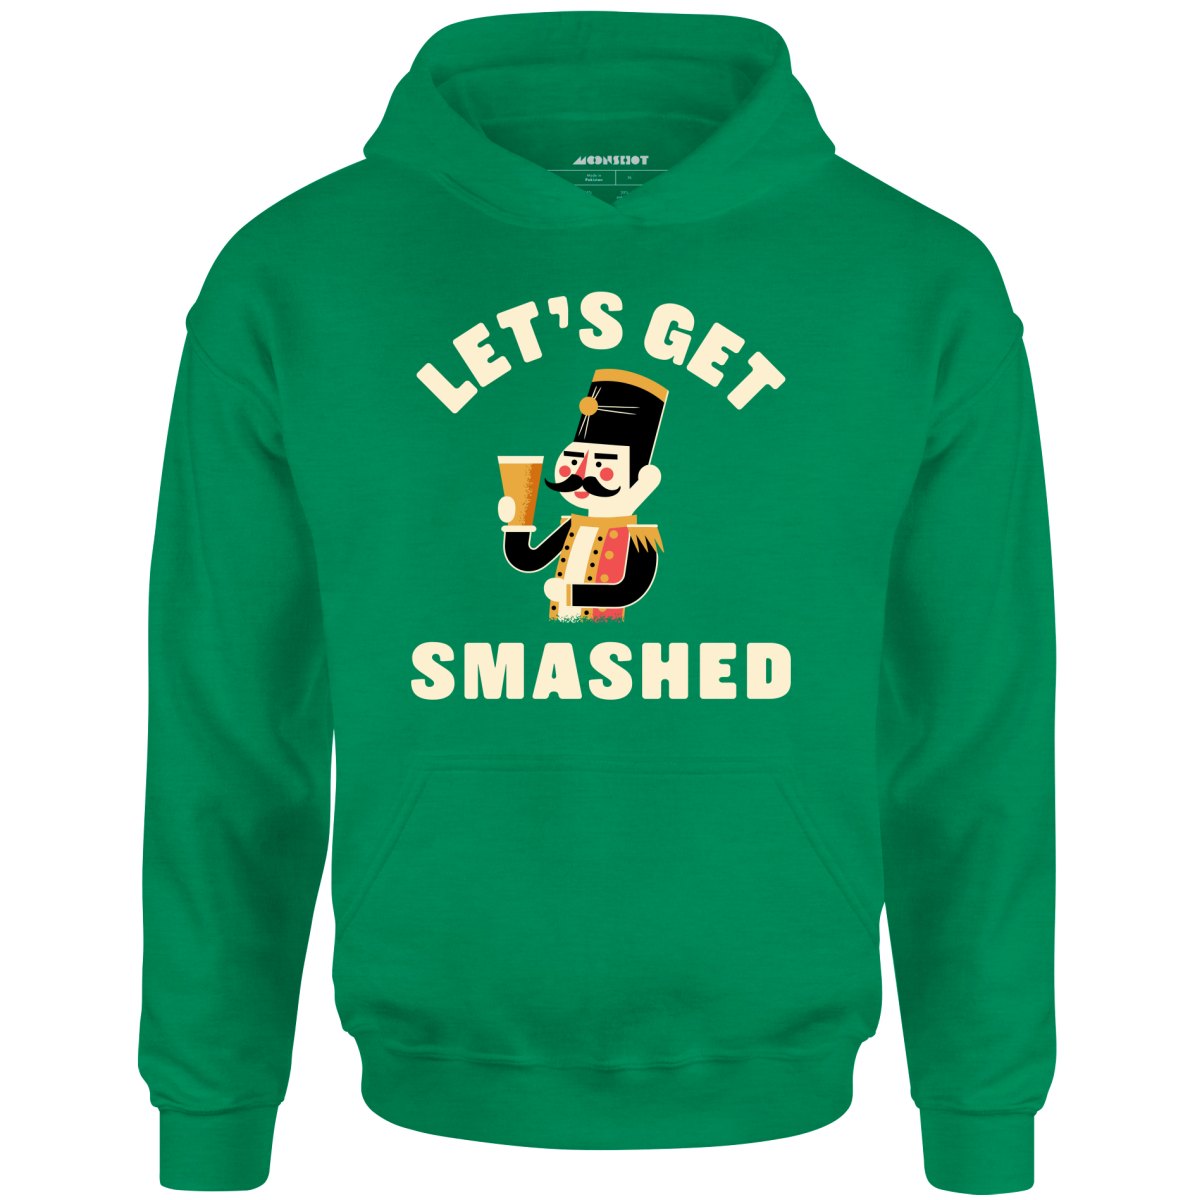 Let's Get Smashed - Unisex Hoodie